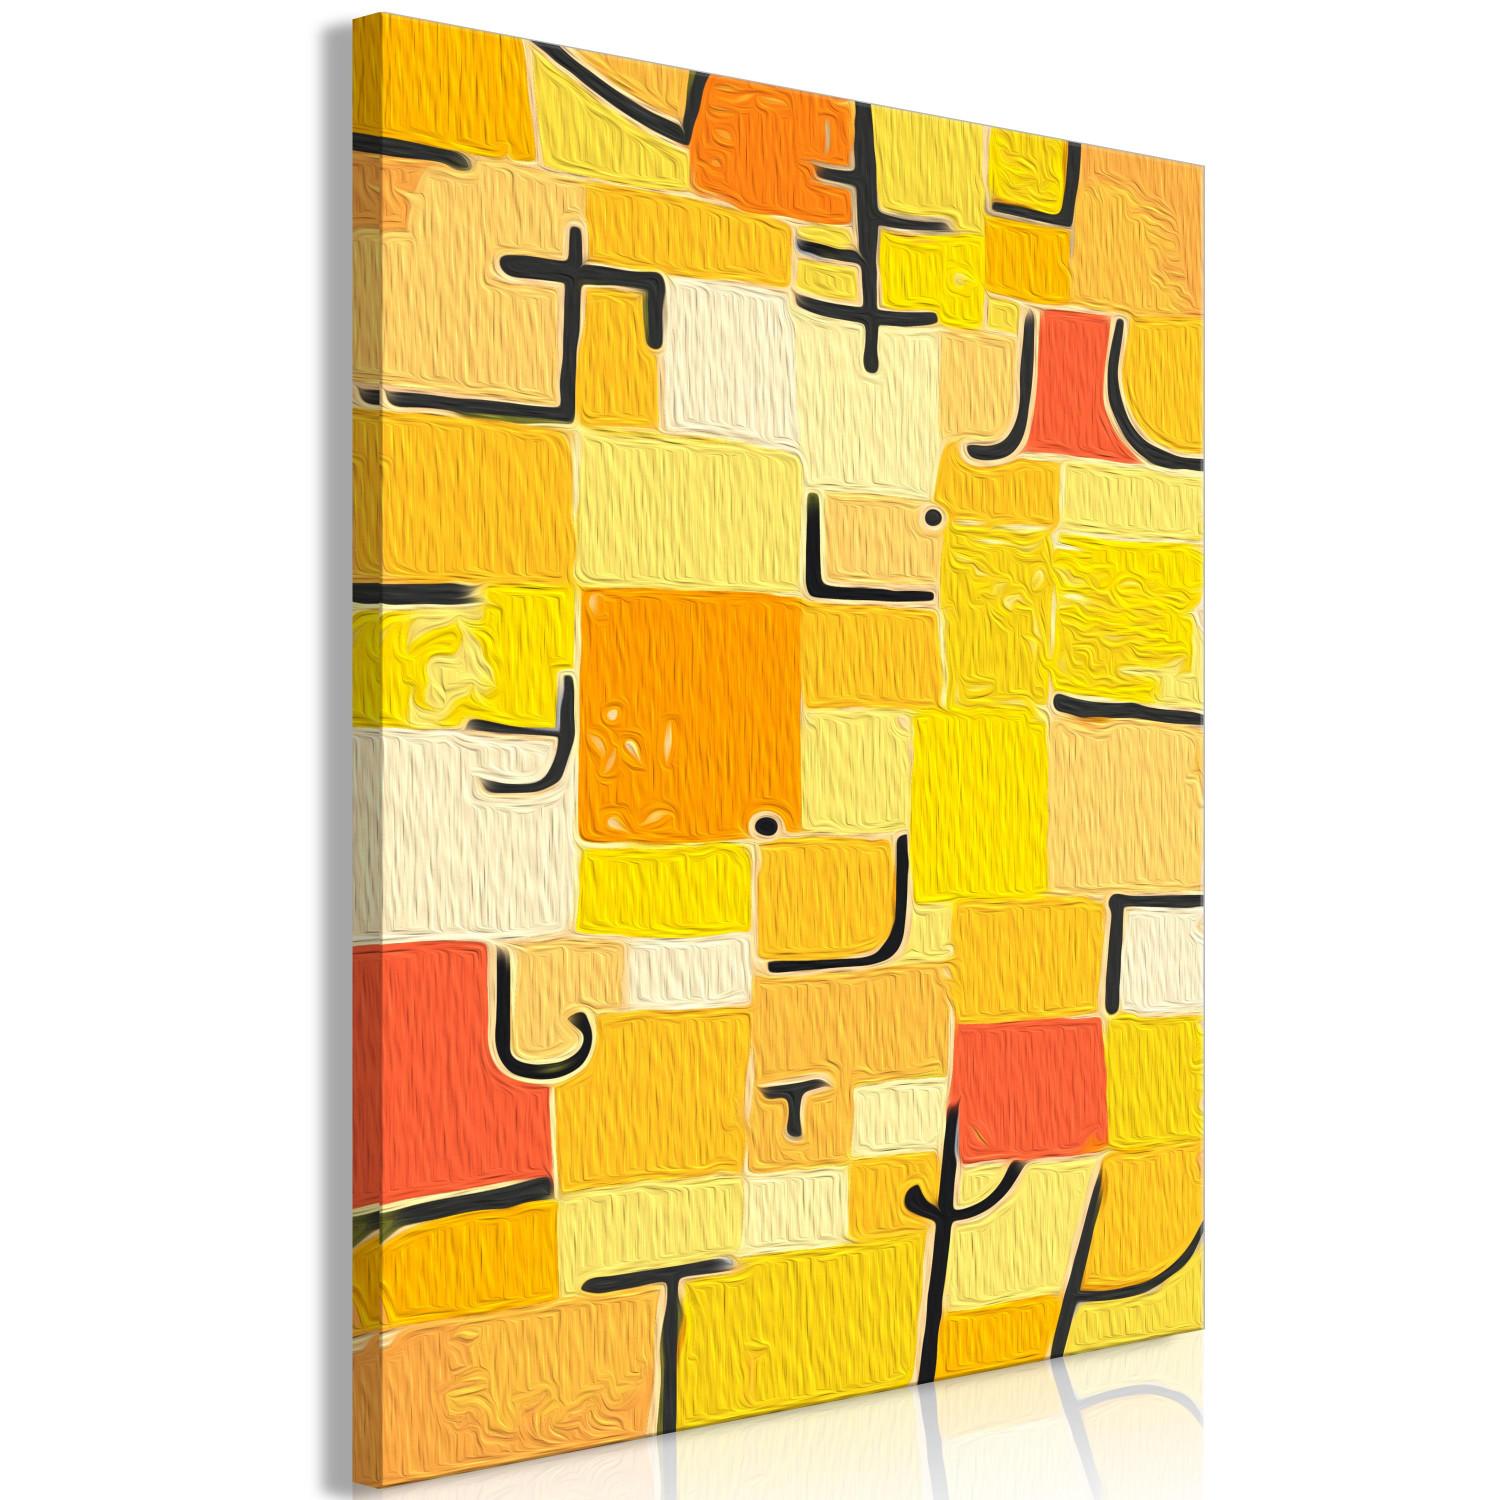 Paint by Number Kit Paul Klee, Signs in Yellow - Black Geometric Shapes on an Orange Background